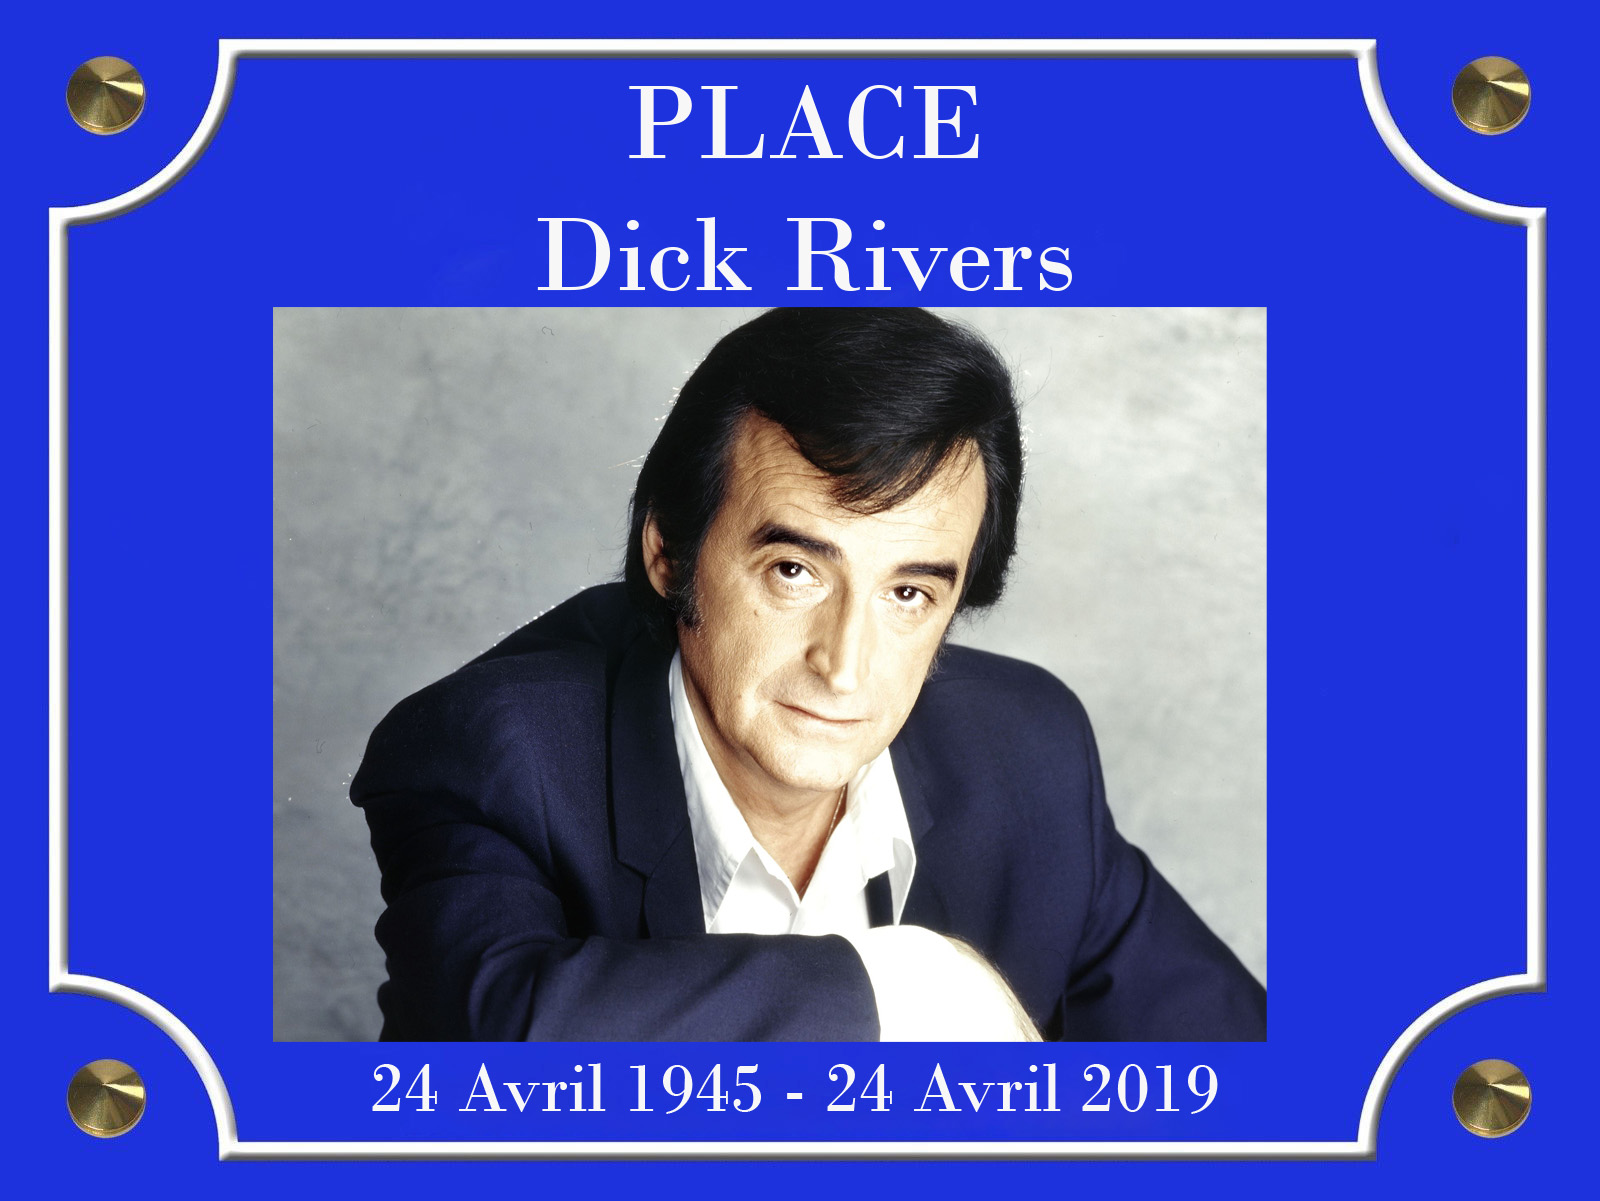 PLACE DICK RIVERS